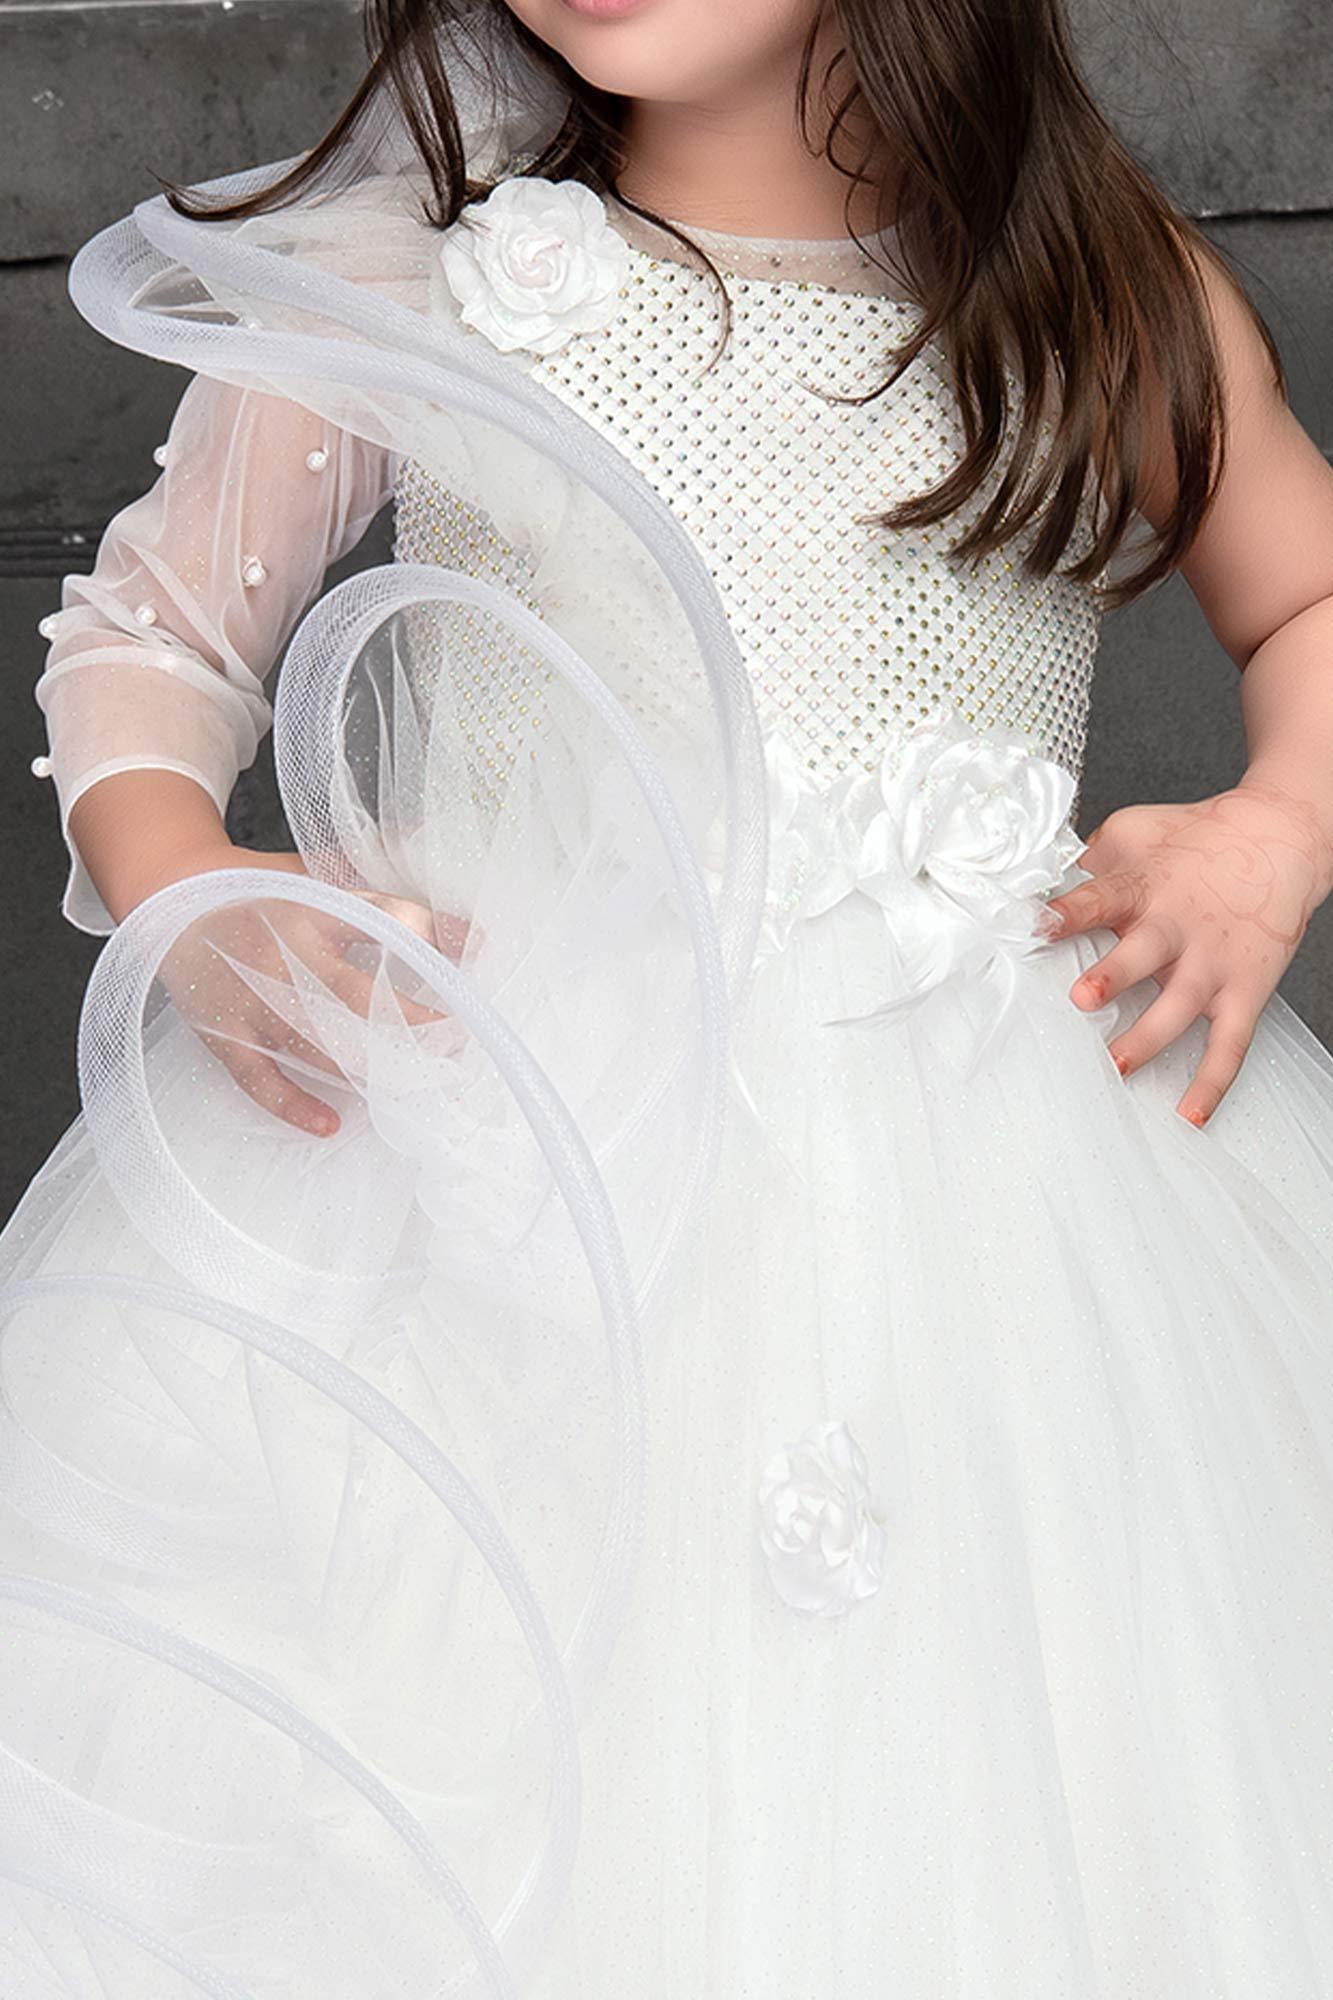 Snow White Princess Party Gown: A Royal Look for Girls. - Lagorii Kids